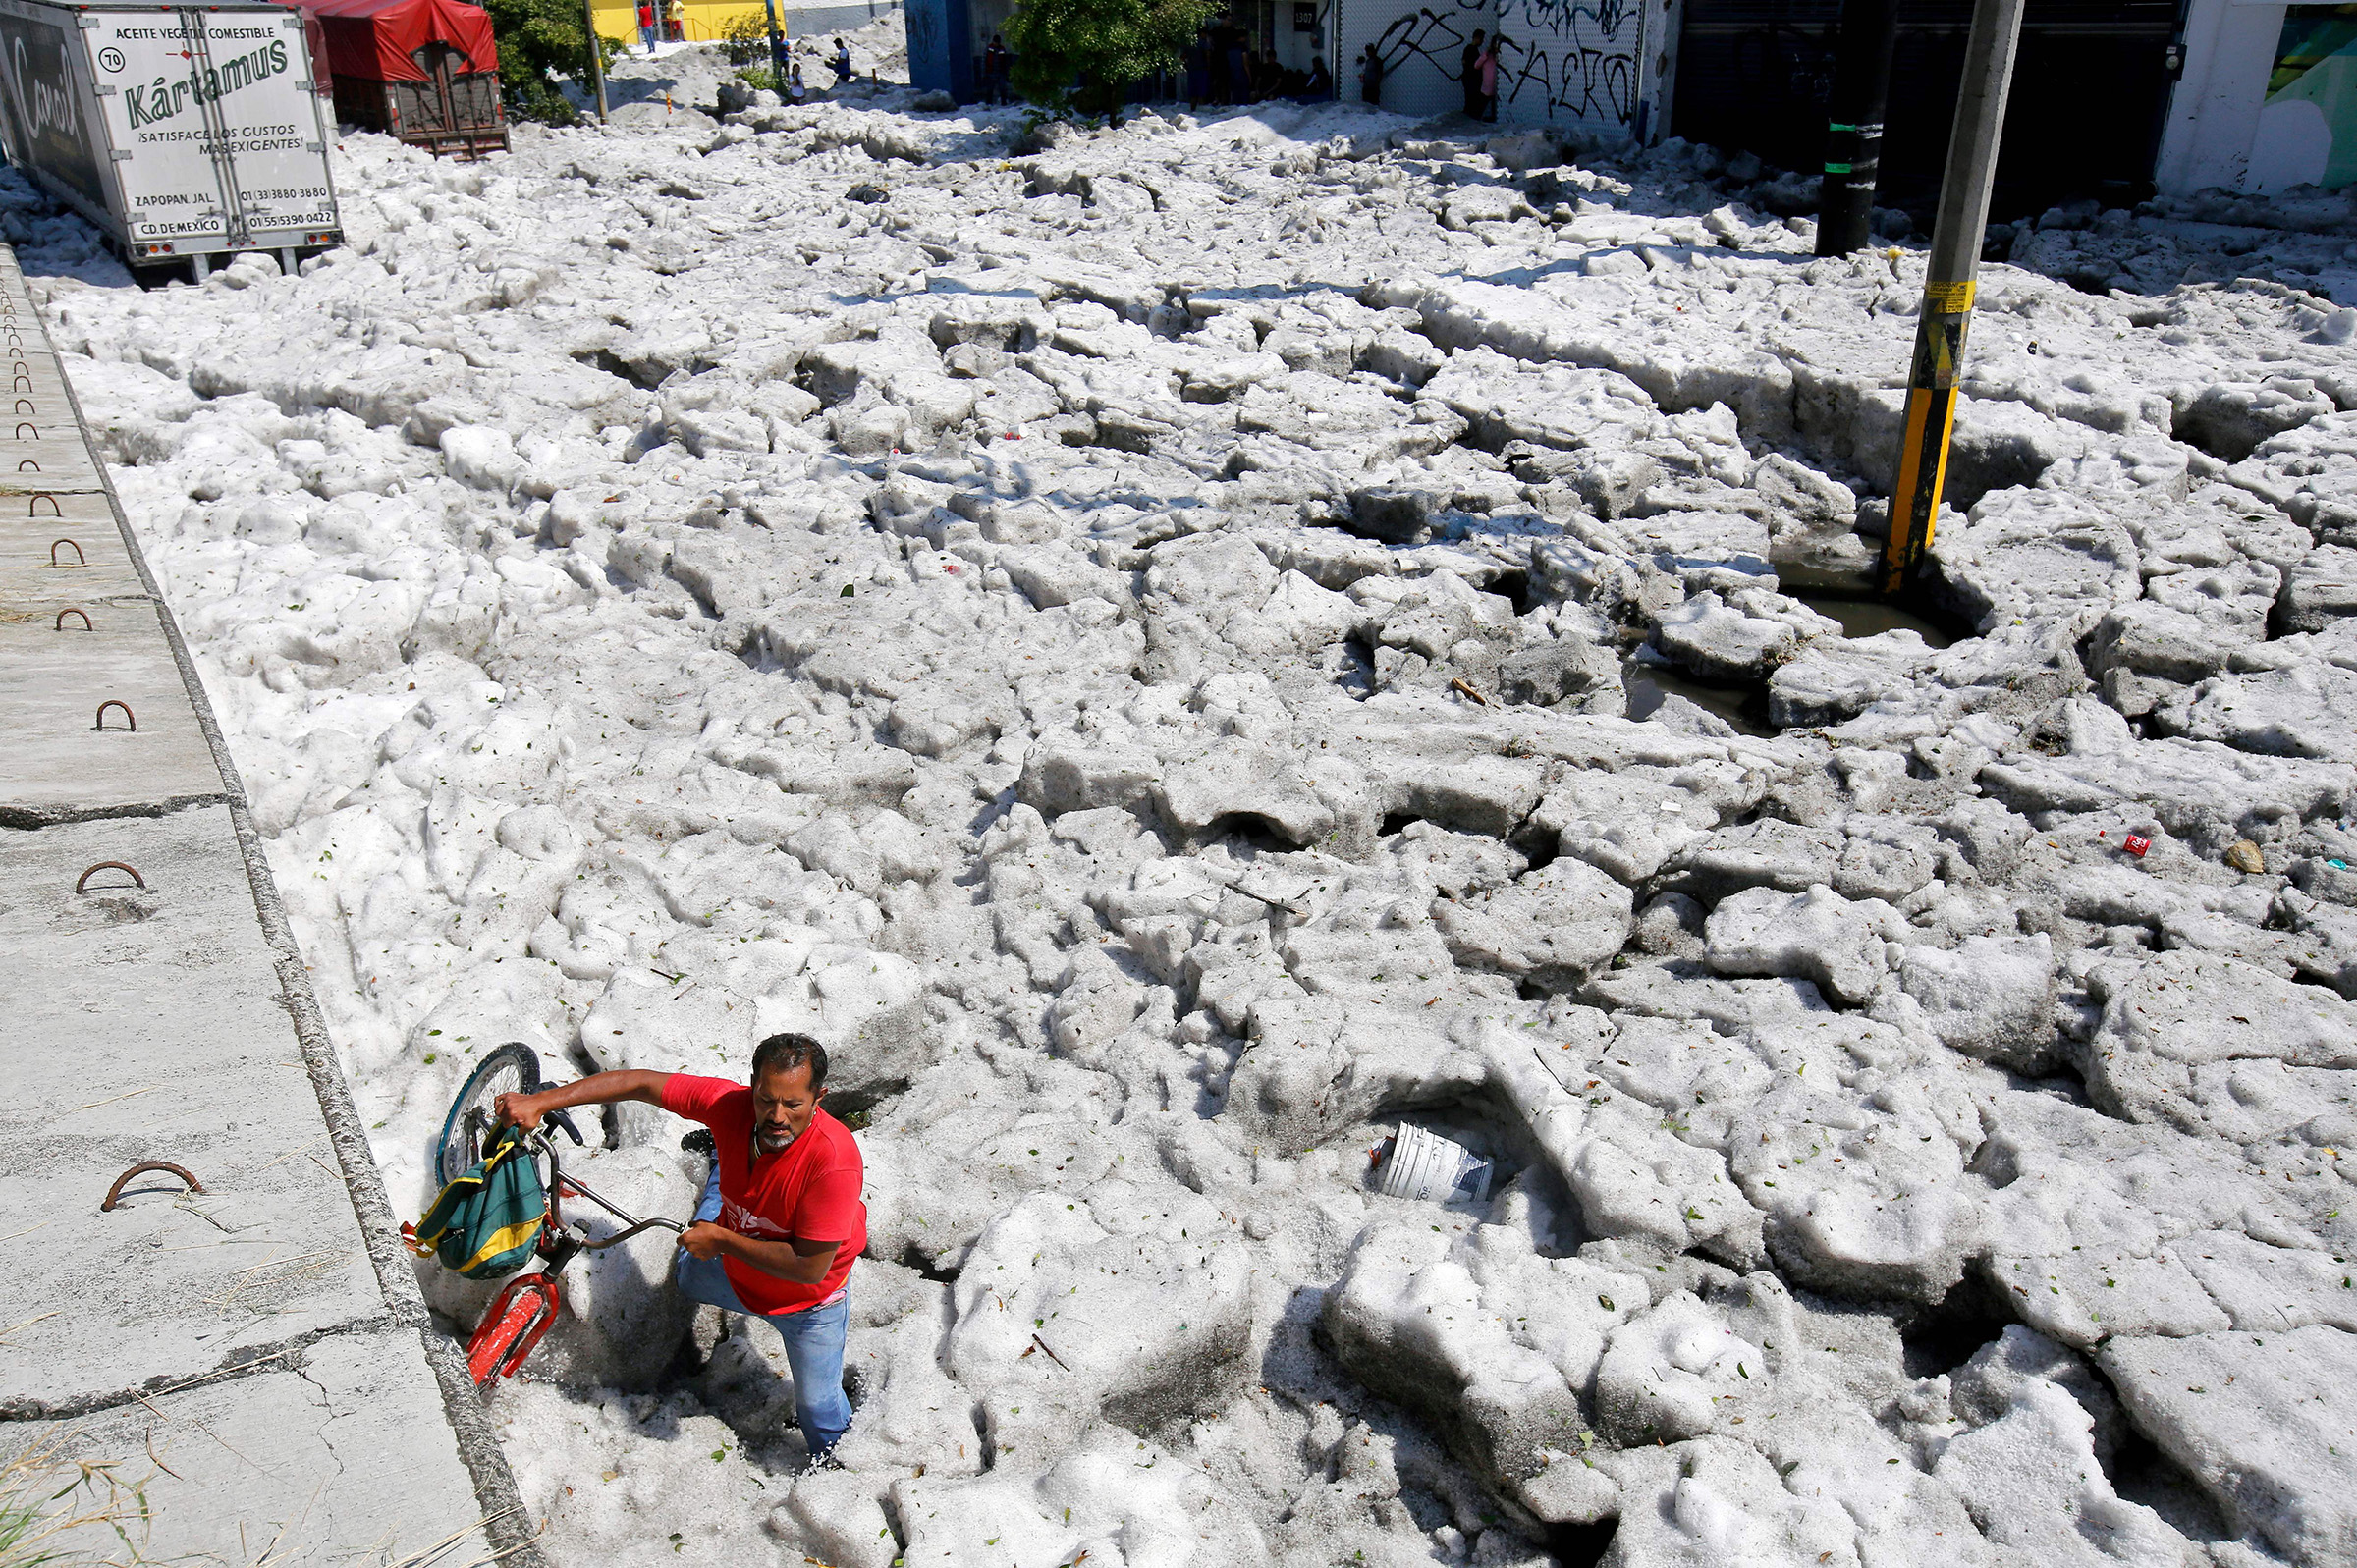 A man with a bike walks on hail in the eastern area of Guadalajara, Jalisco state, Mexico, on June 30, 2019. (Ulises Ruiz—AFP/Getty Images)